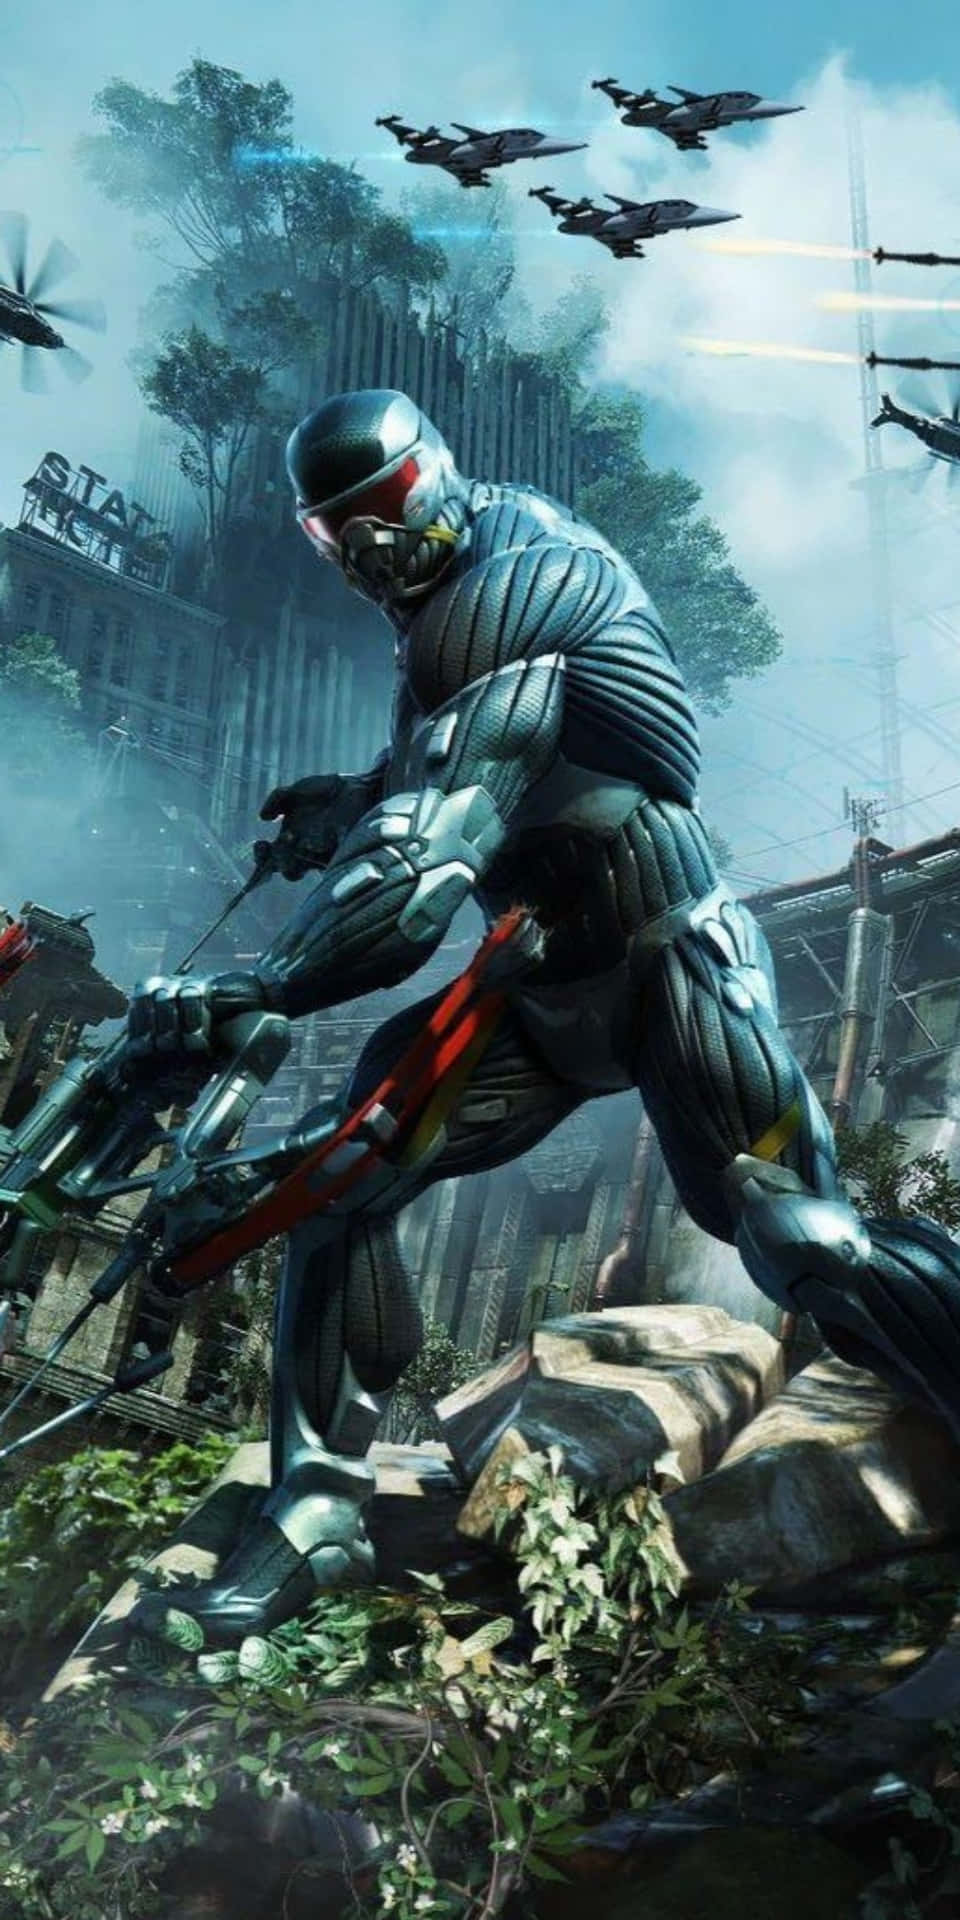 Join the battlefield with Pixel 3 and experience Crysis 3 in all its glory.